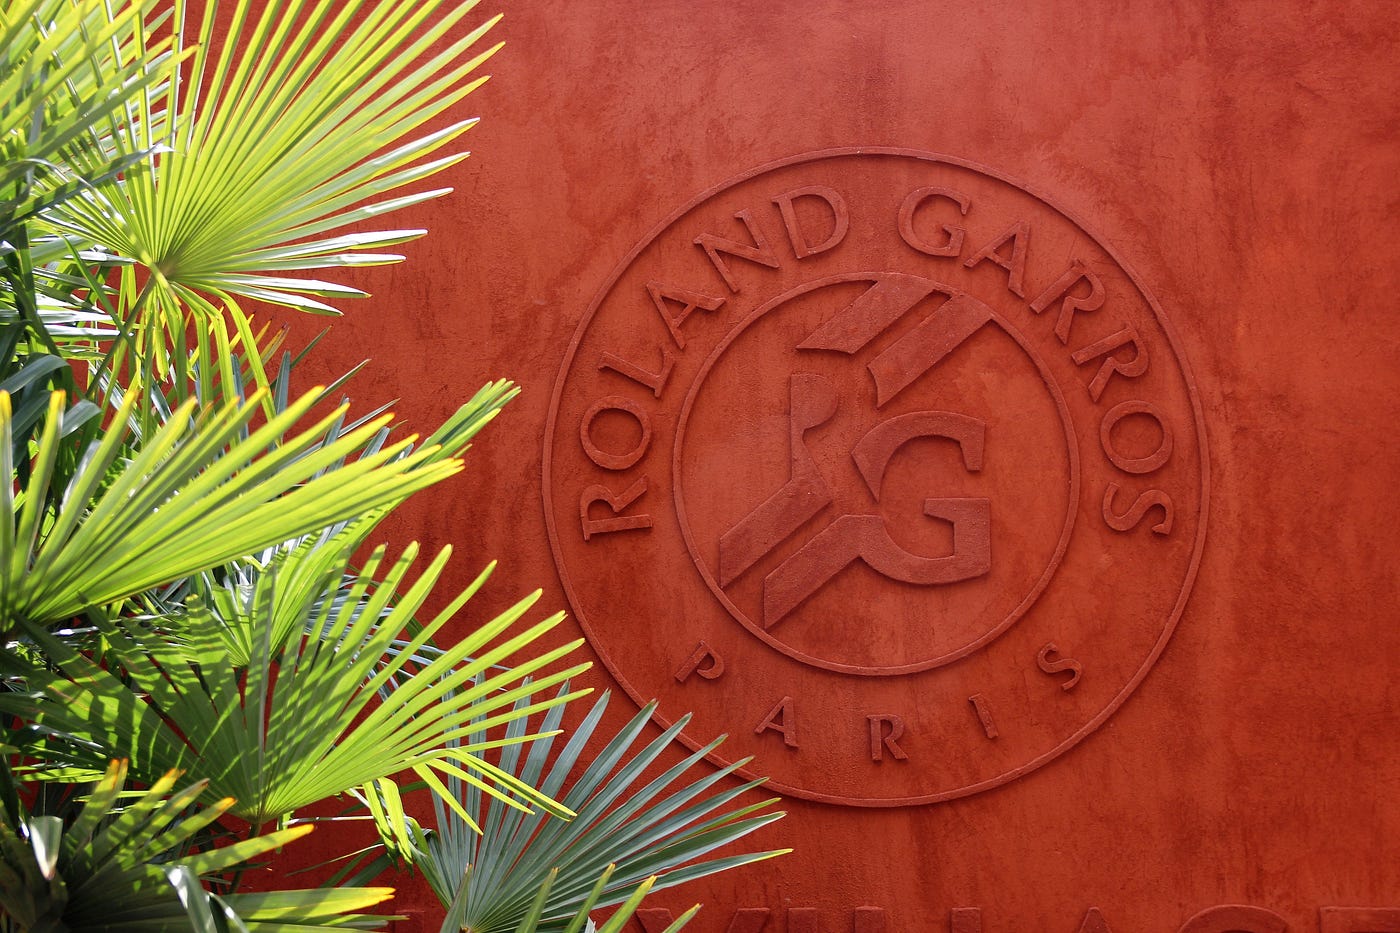 A Tennis Fan's First Experience with Radio Roland Garros | by Felice Lam |  Medium